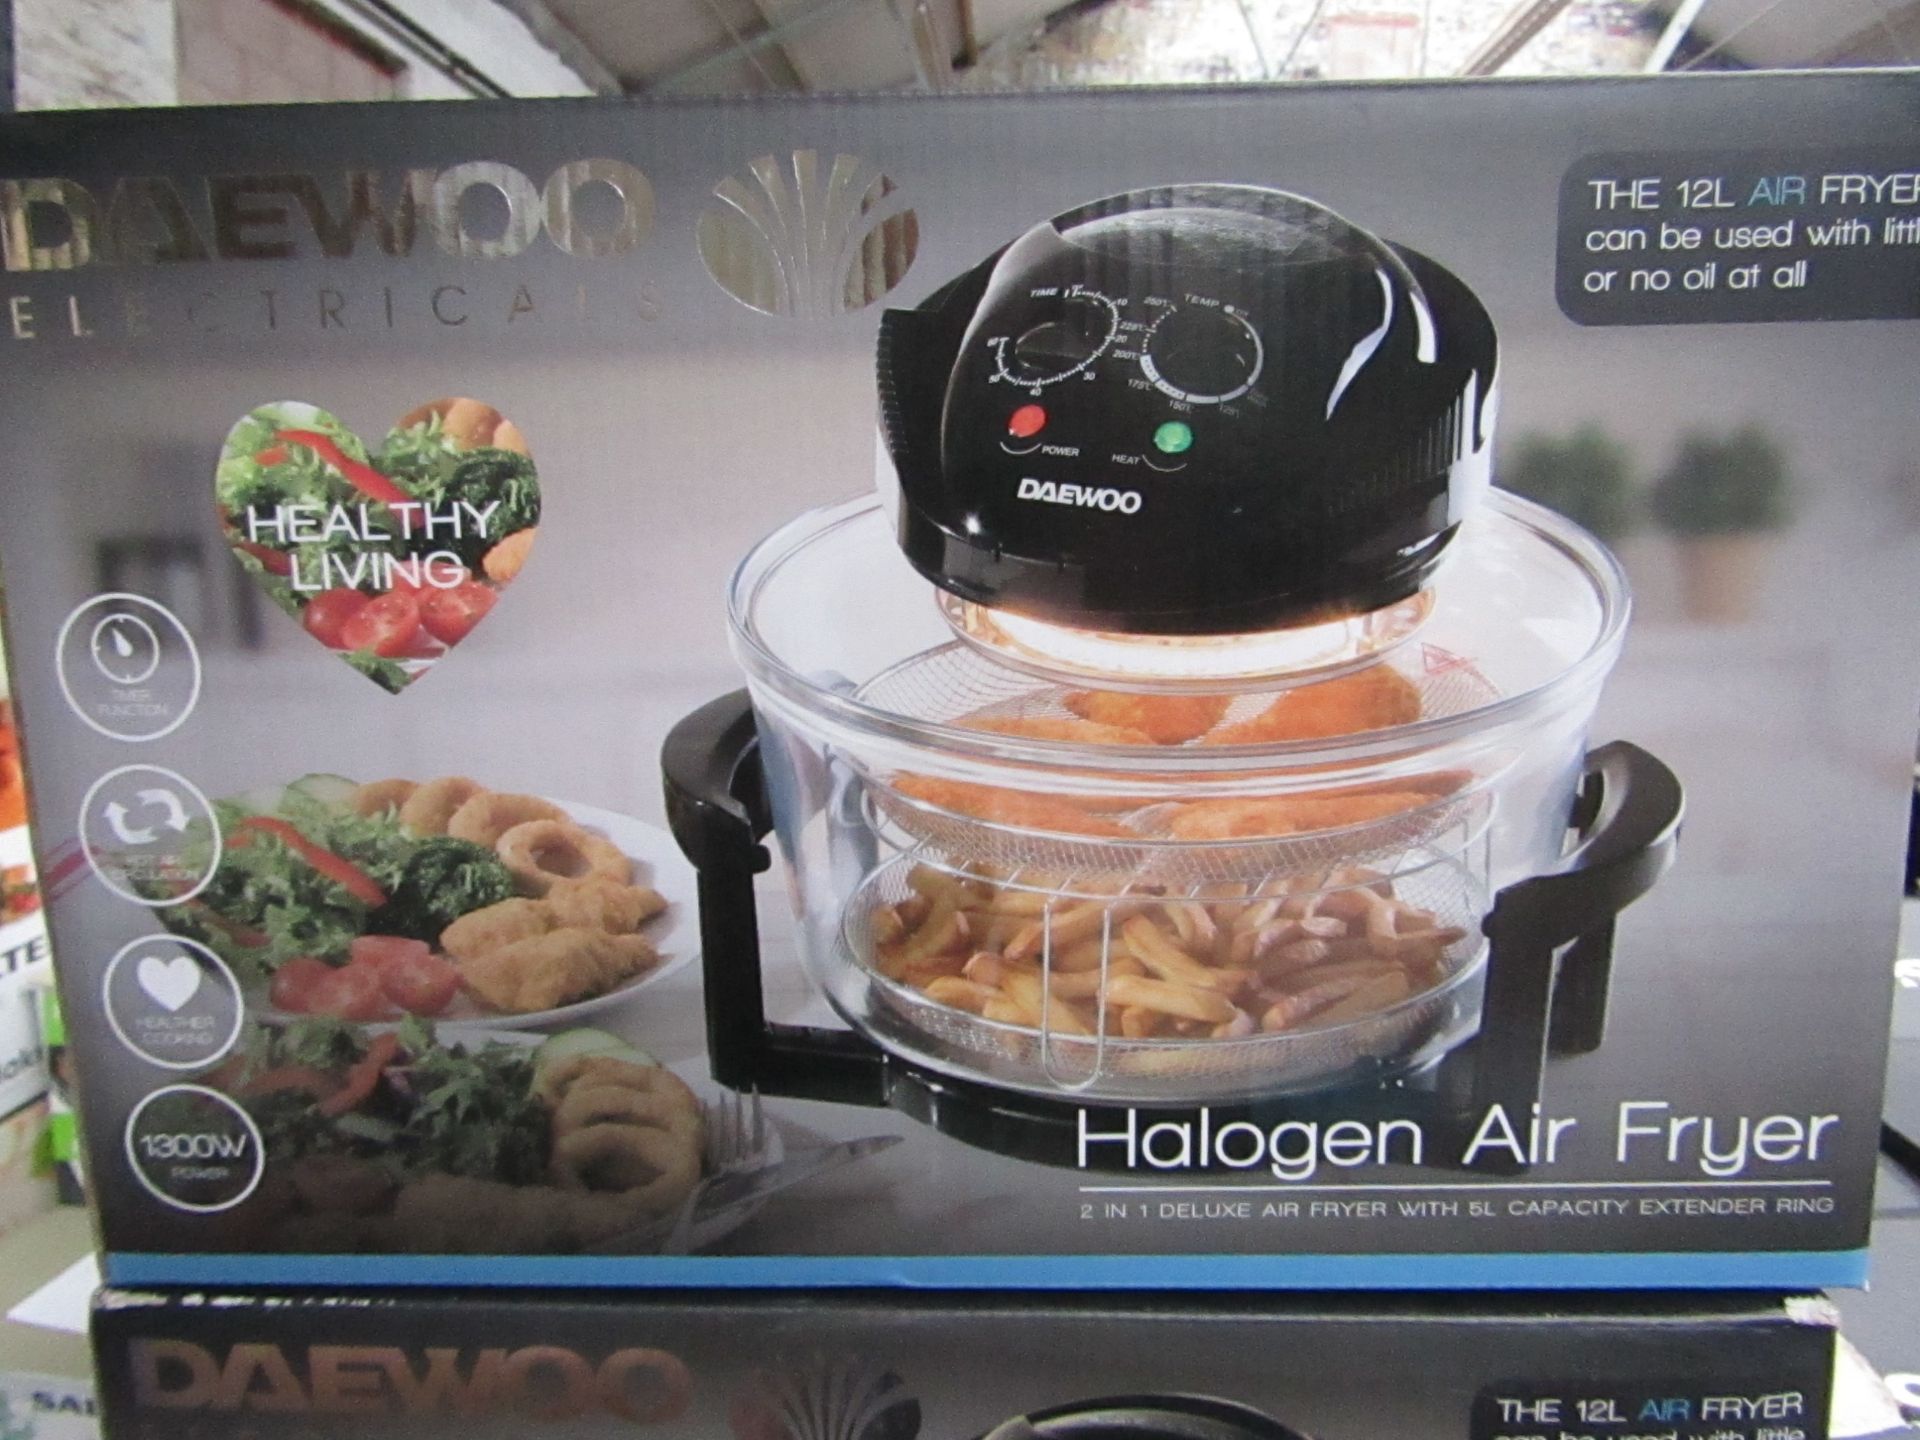 Daewoo halogen air fryer Boxed and unchecked